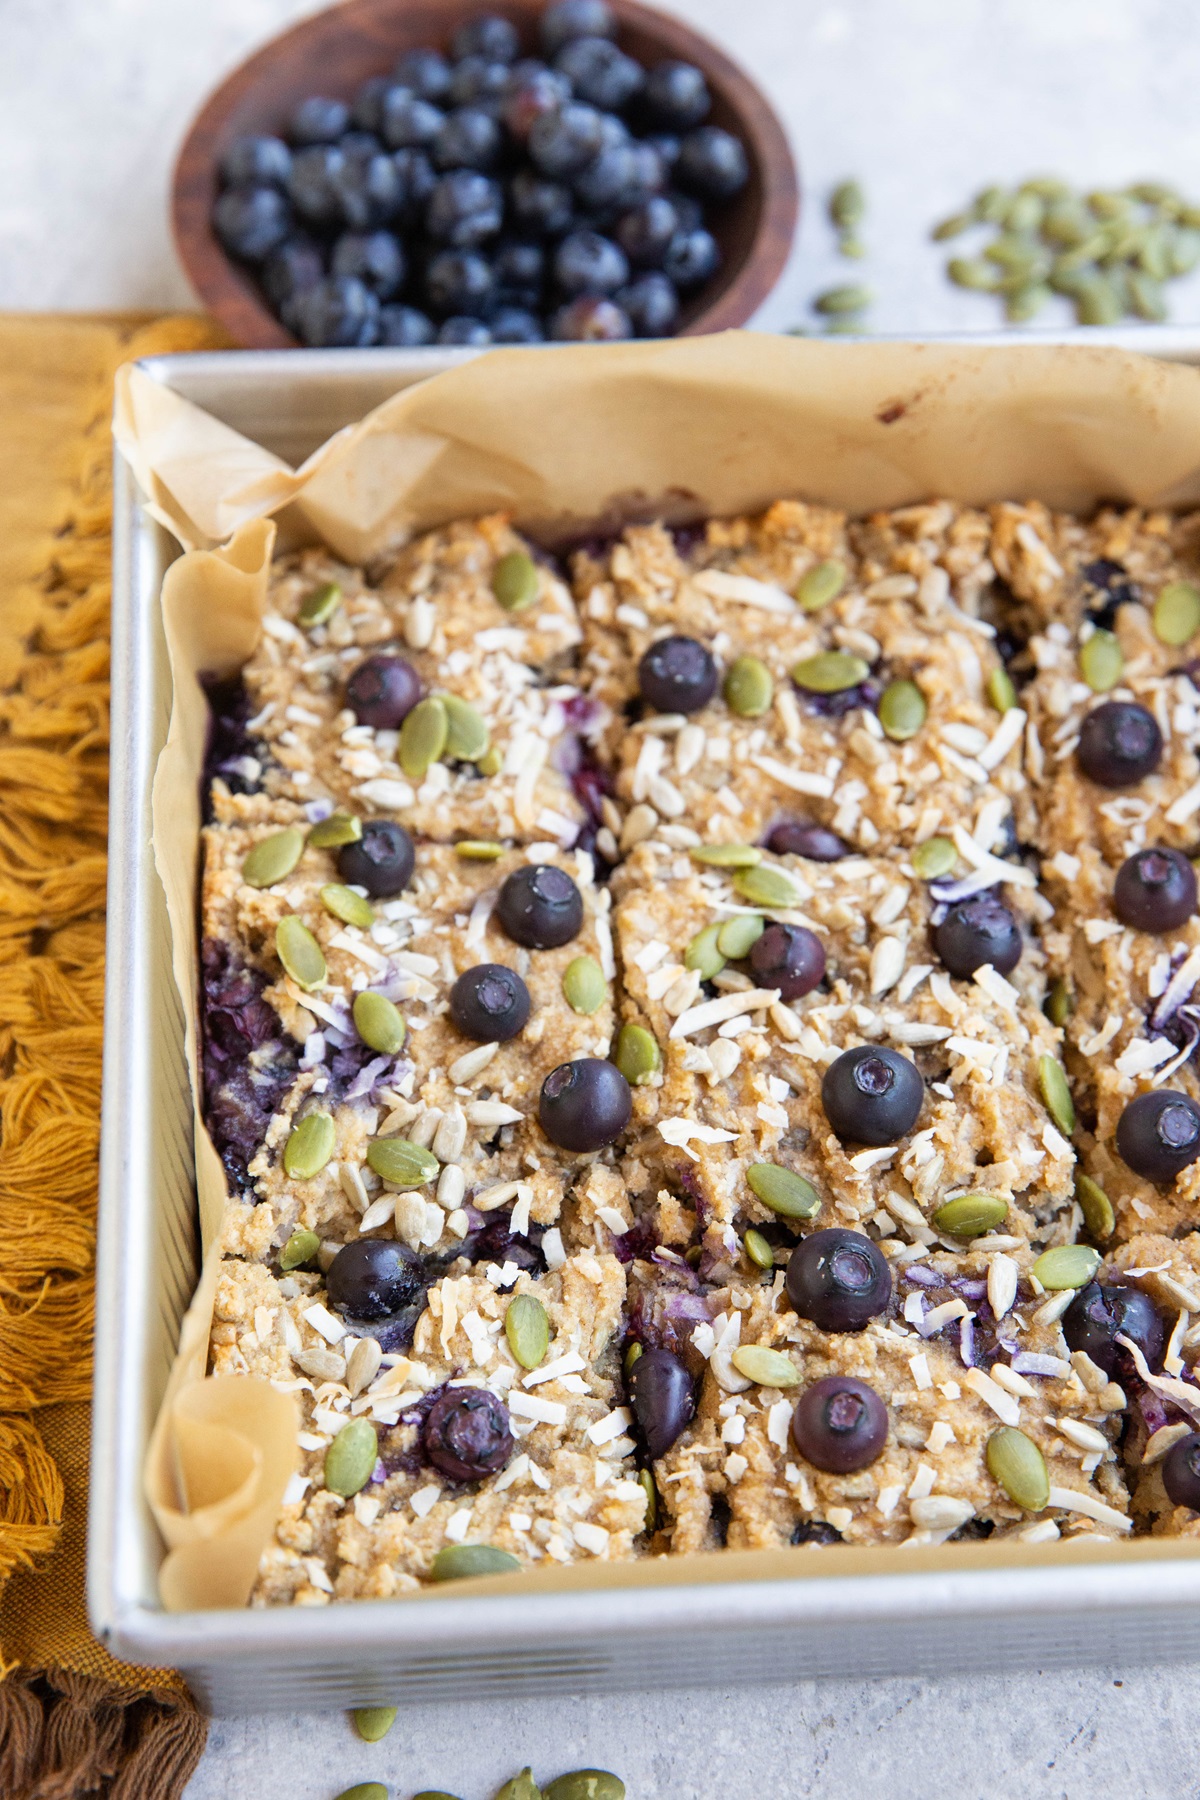 Baking dish of blueberry breakfast bars sprinkled with seeds and coconut.